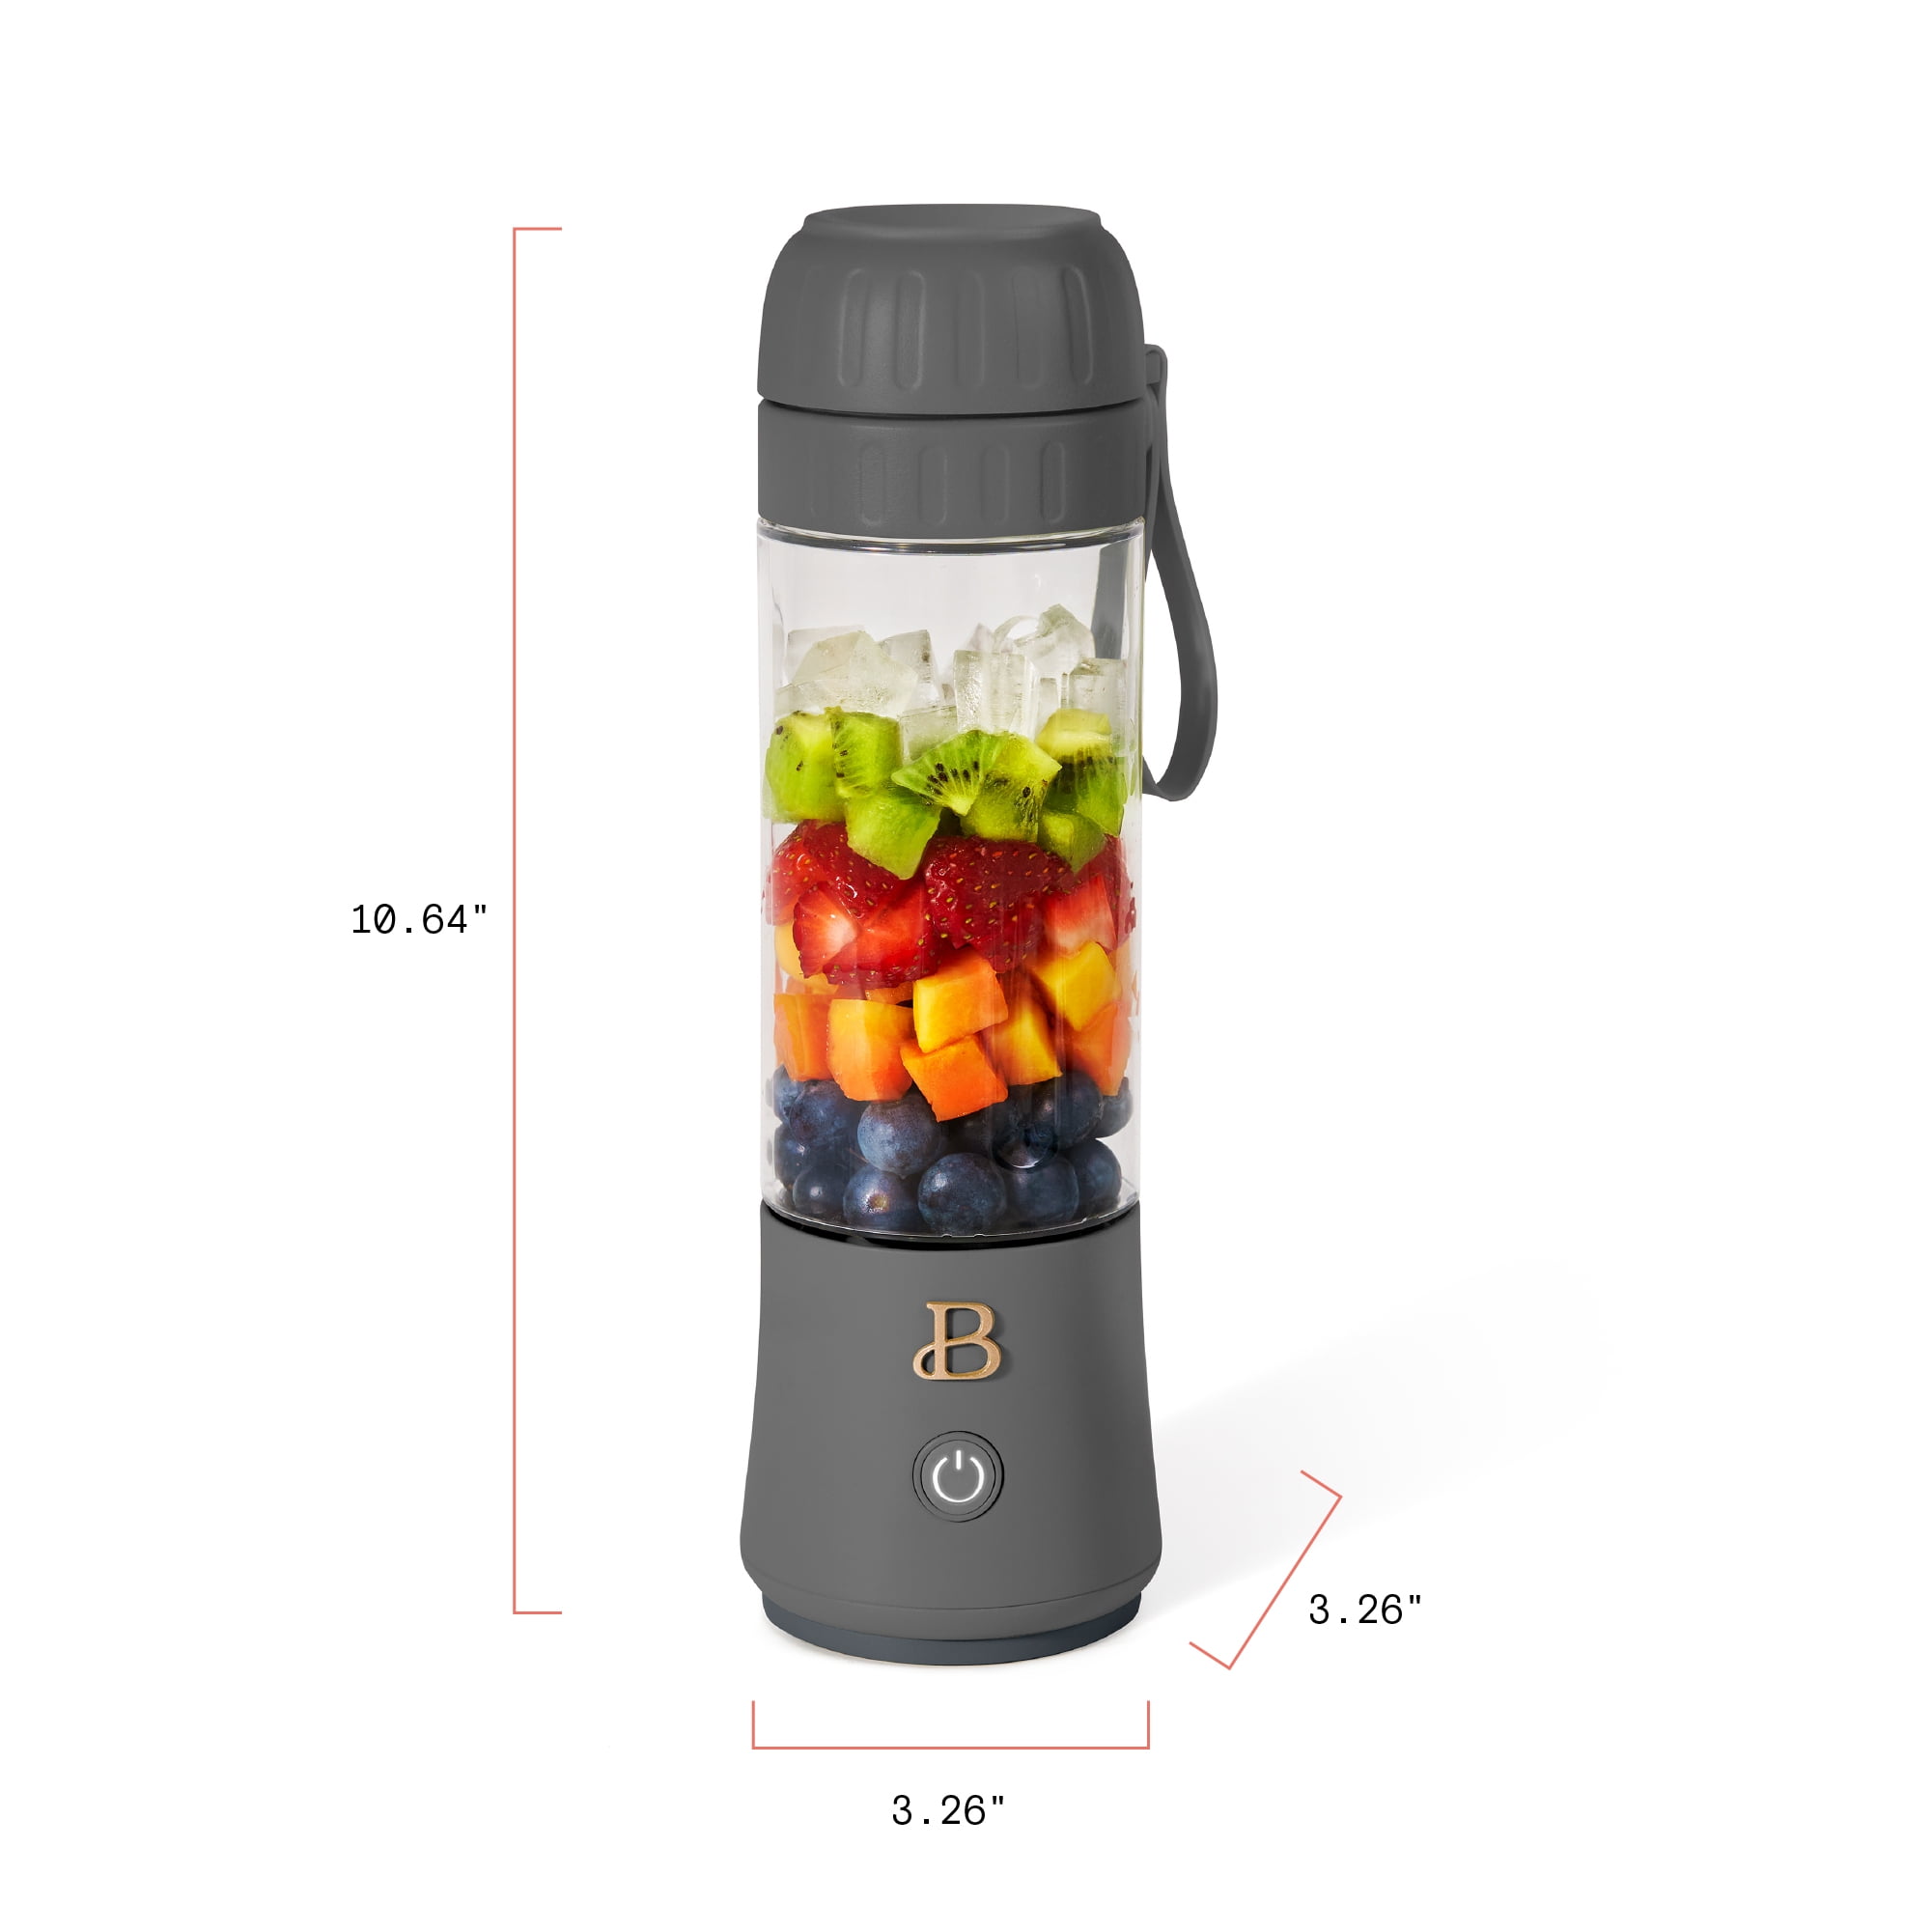 Keep Life Colorful with BlendJet 2 the Original Portable Blender - Three  Different Directions